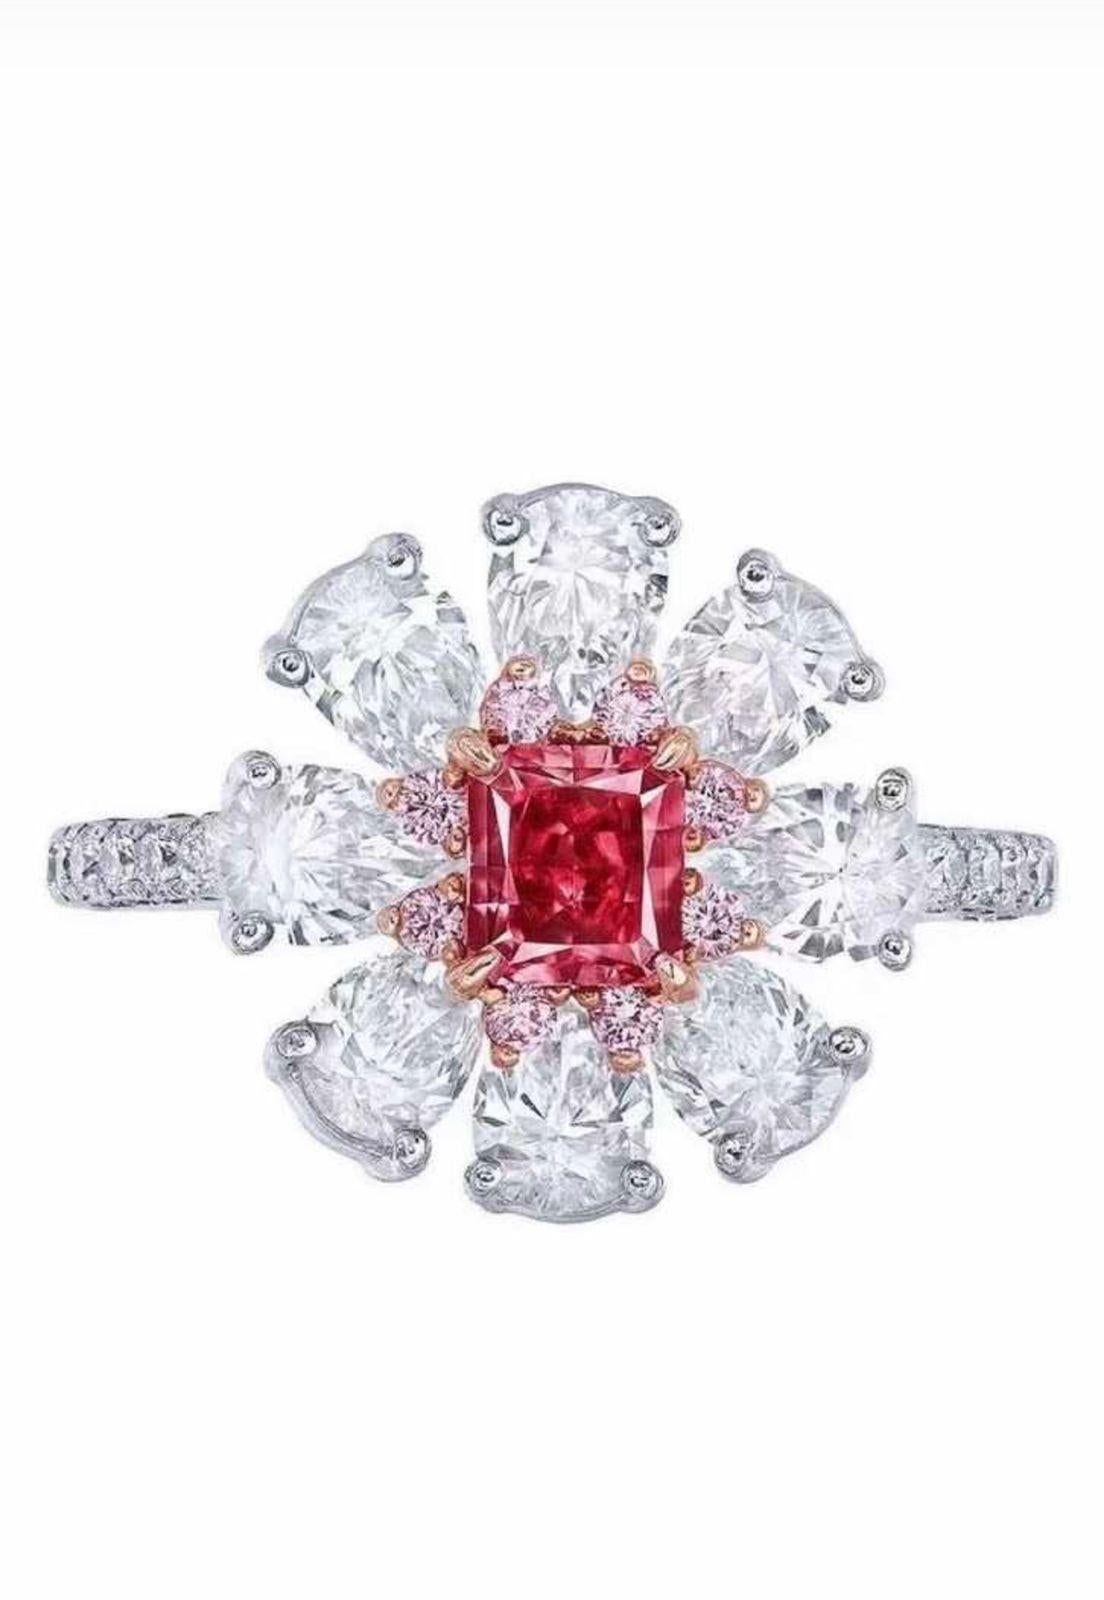 Emilio Jewelry GIA Certified 3.37 Carat Fancy Pure Red Diamond Ring For Sale